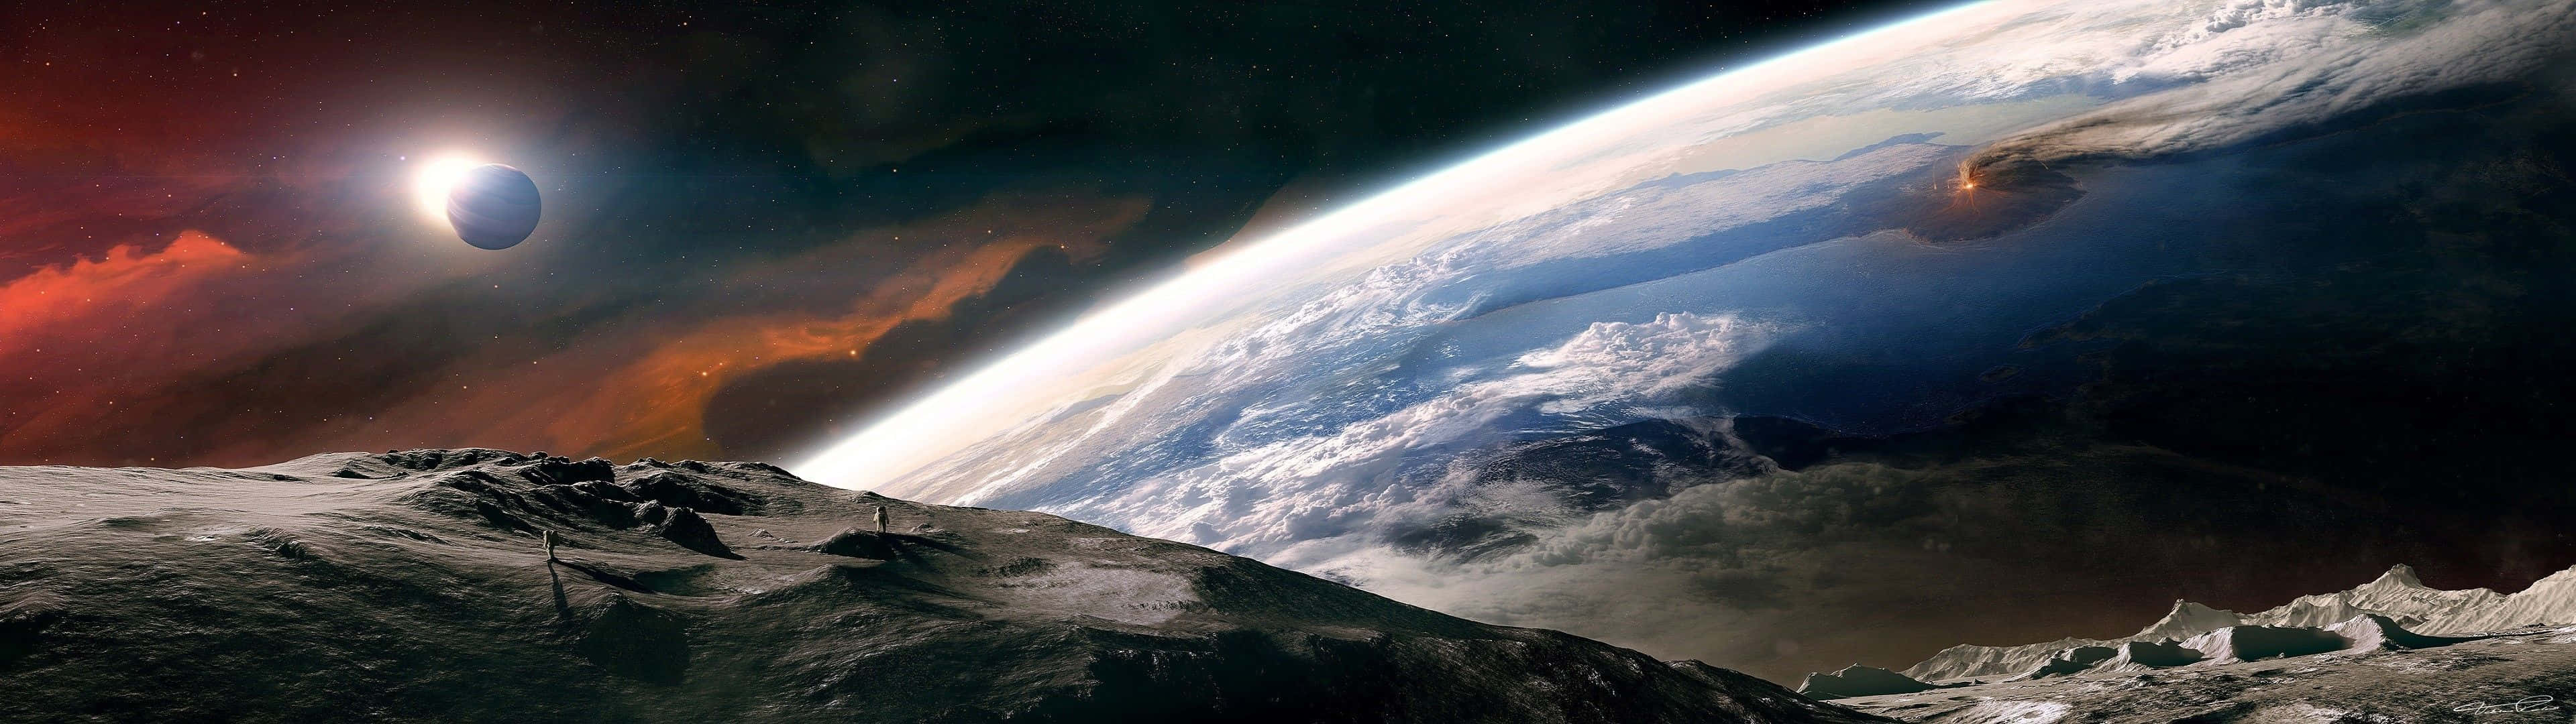 Experience the beauty of space in breathtaking full HD Wallpaper